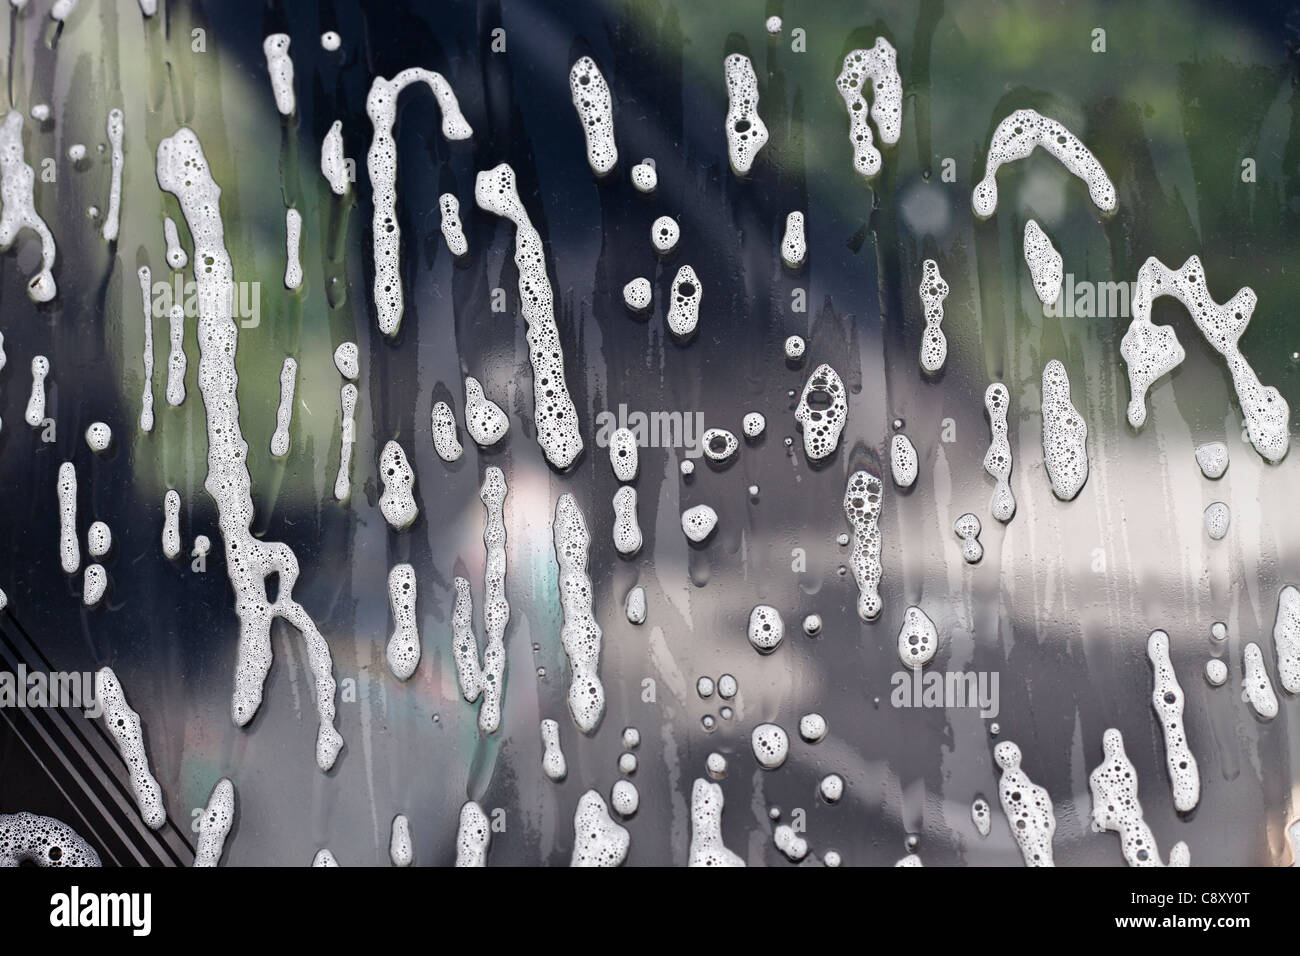 Detail of soap bubbles on car window. Stock Photo